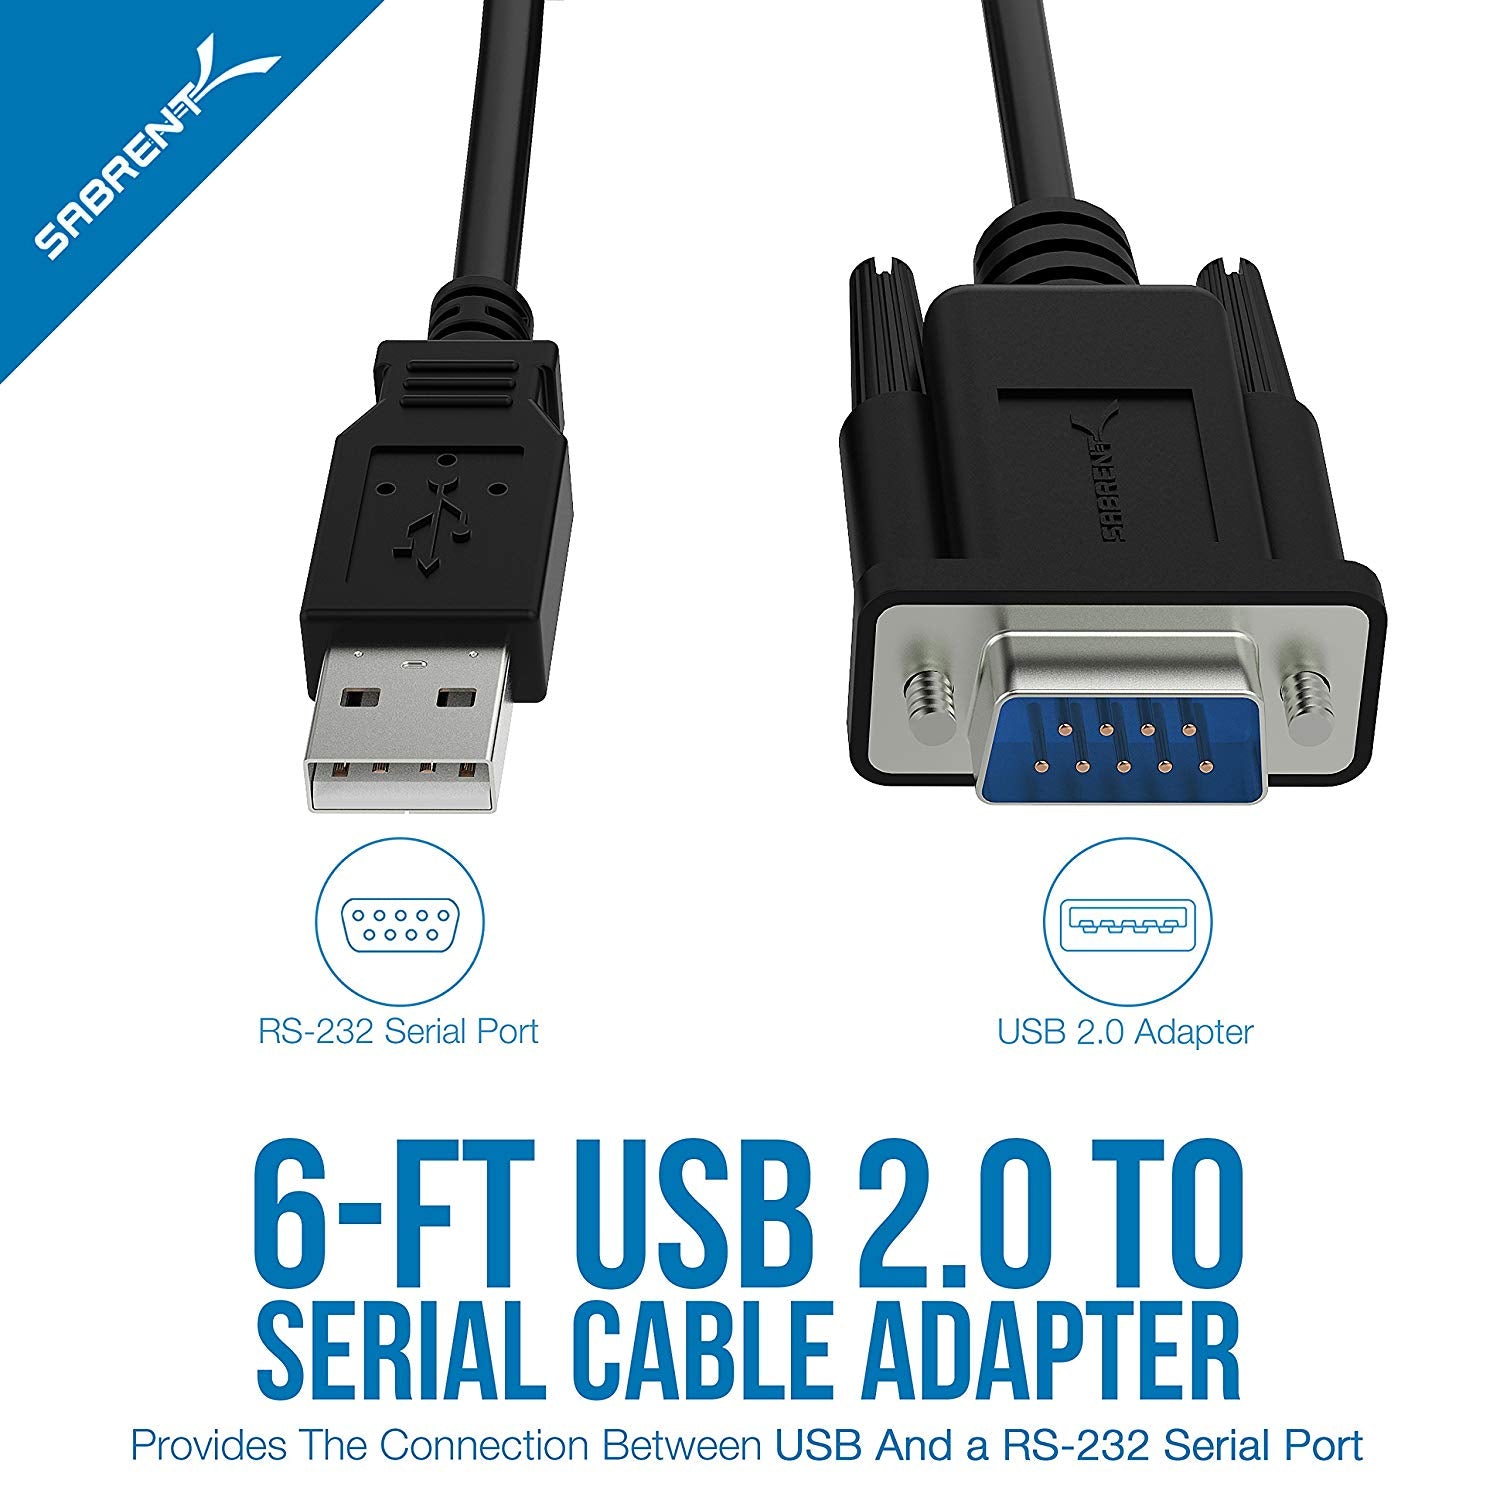 FTDI Chip RS232 USB A Female to DB-9 Male Converter Cable